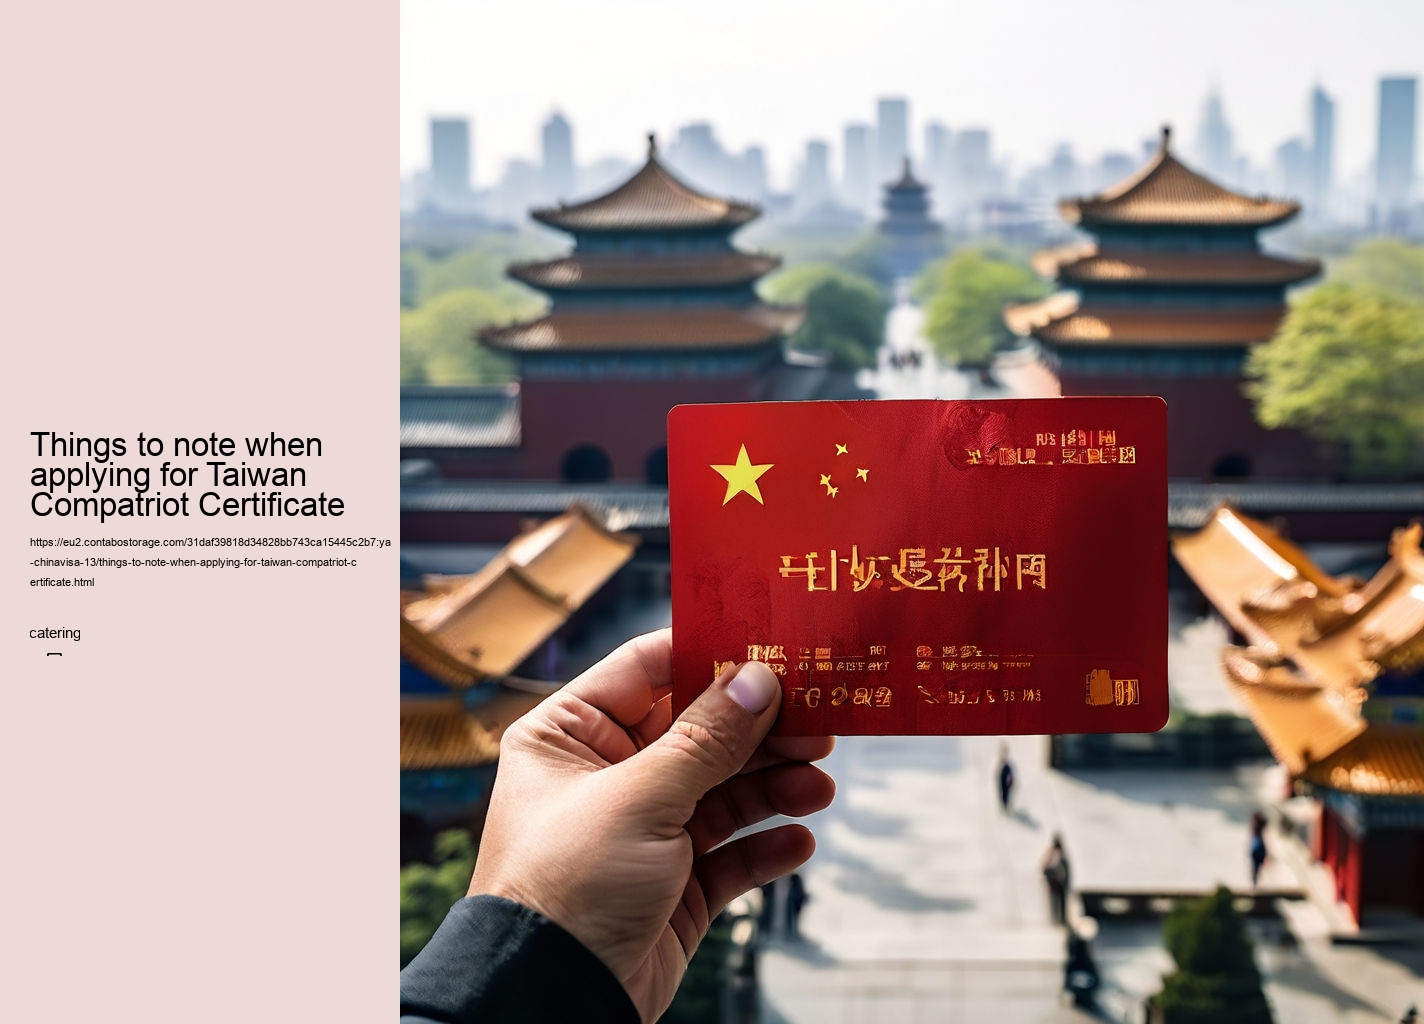 Things to note when applying for Taiwan Compatriot Certificate